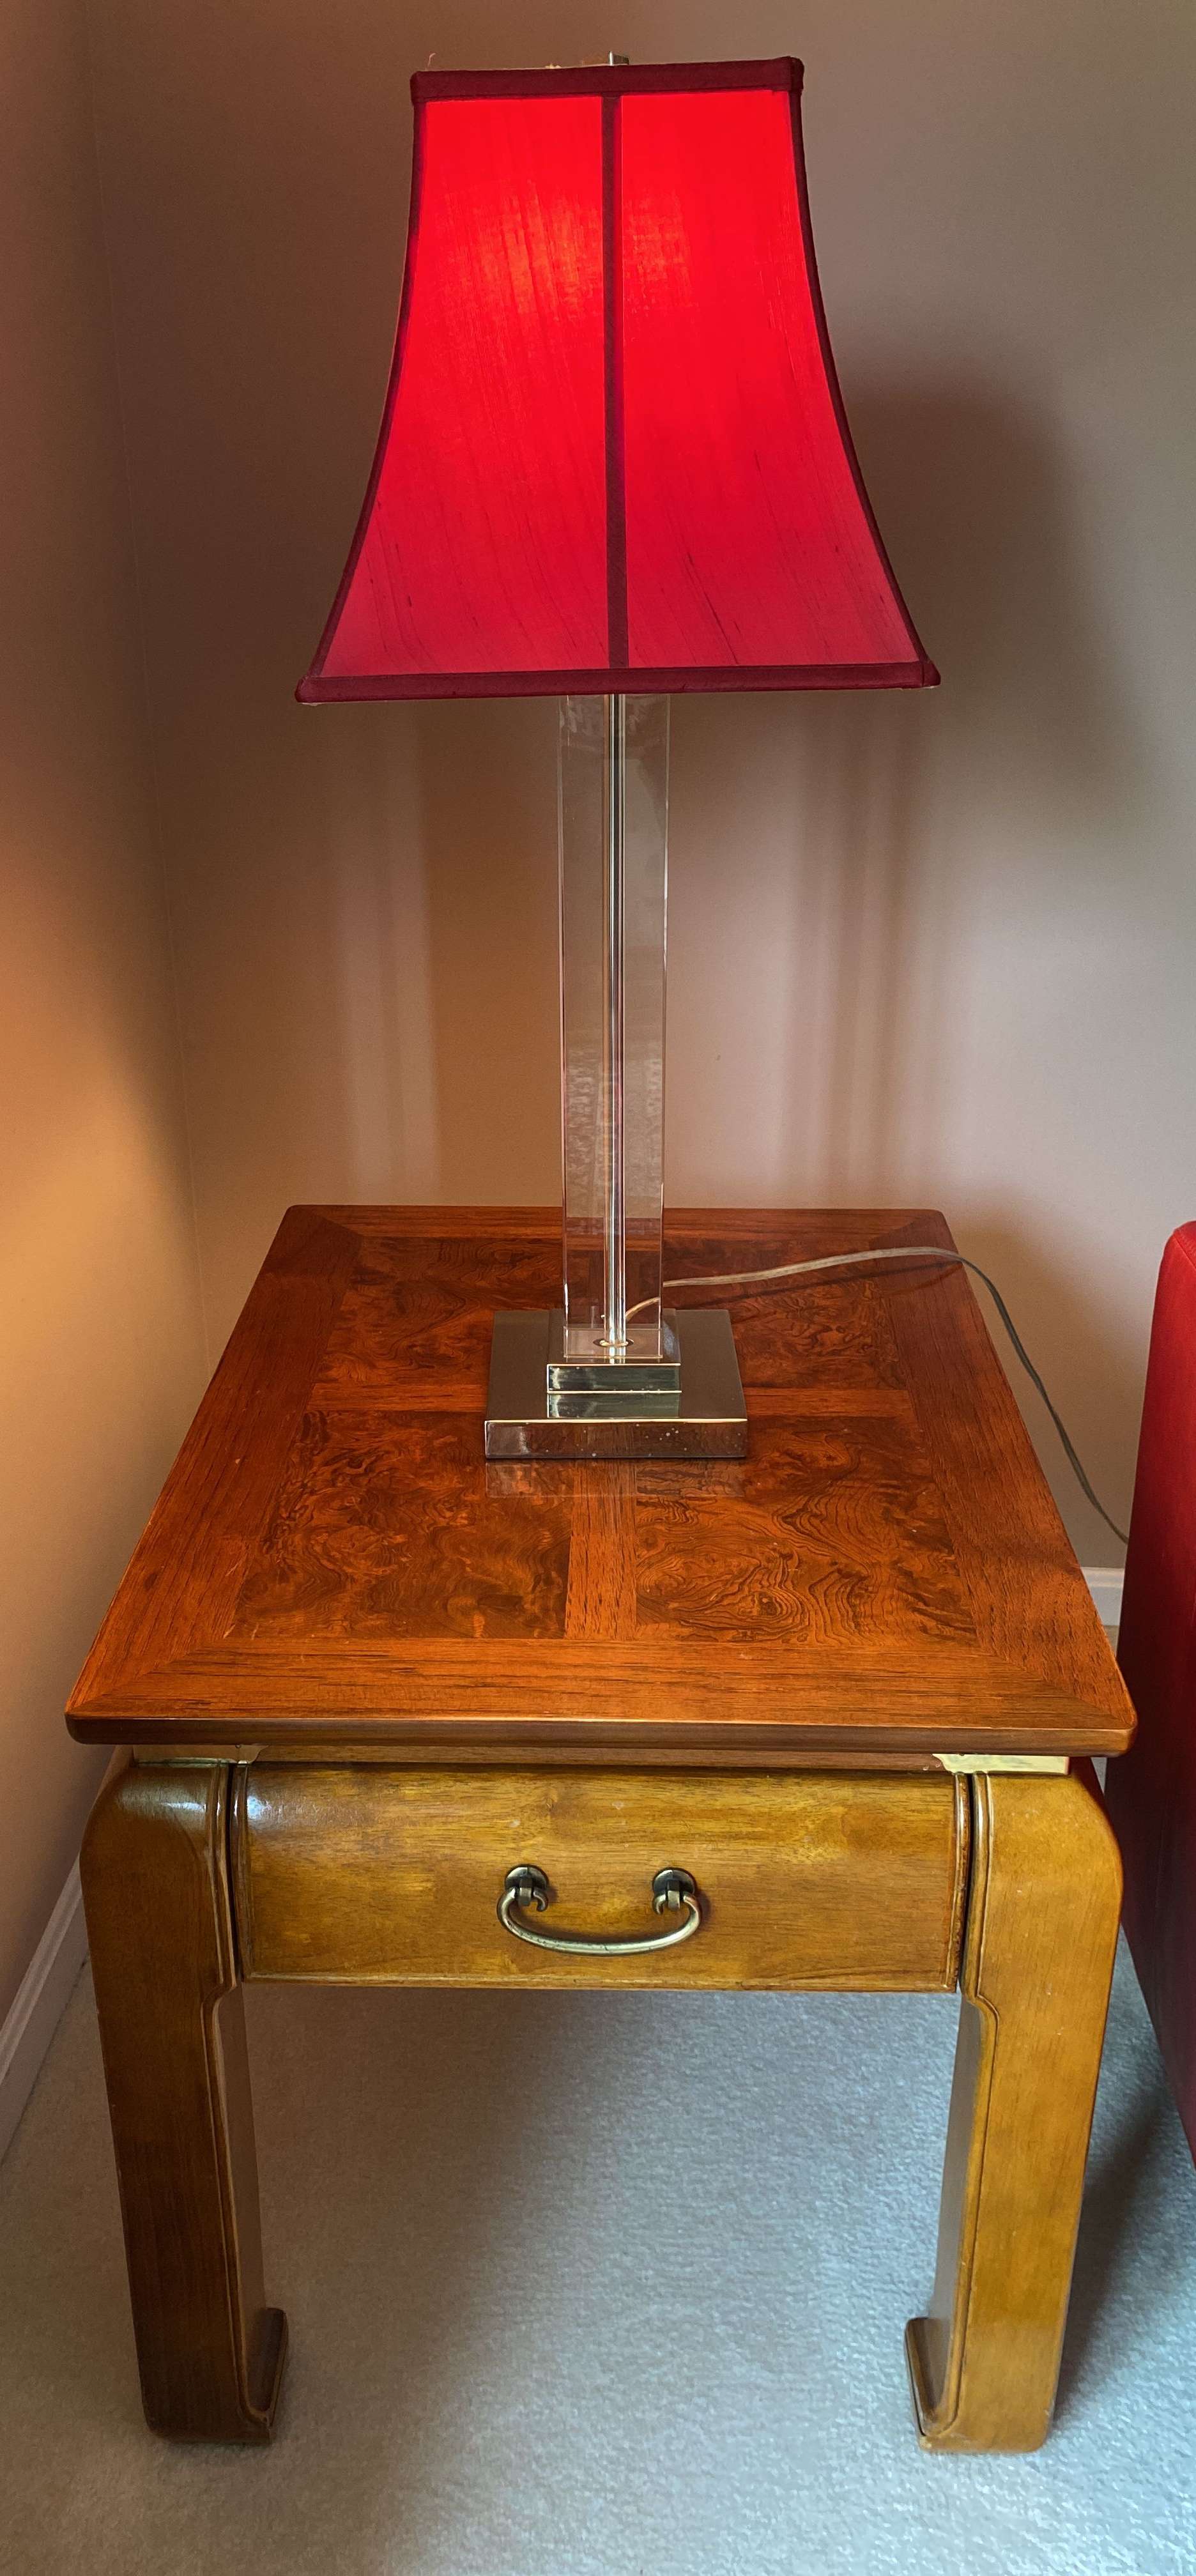 Large Red Glass & Brass Table Lamp, 1970s - Hunt Vintage